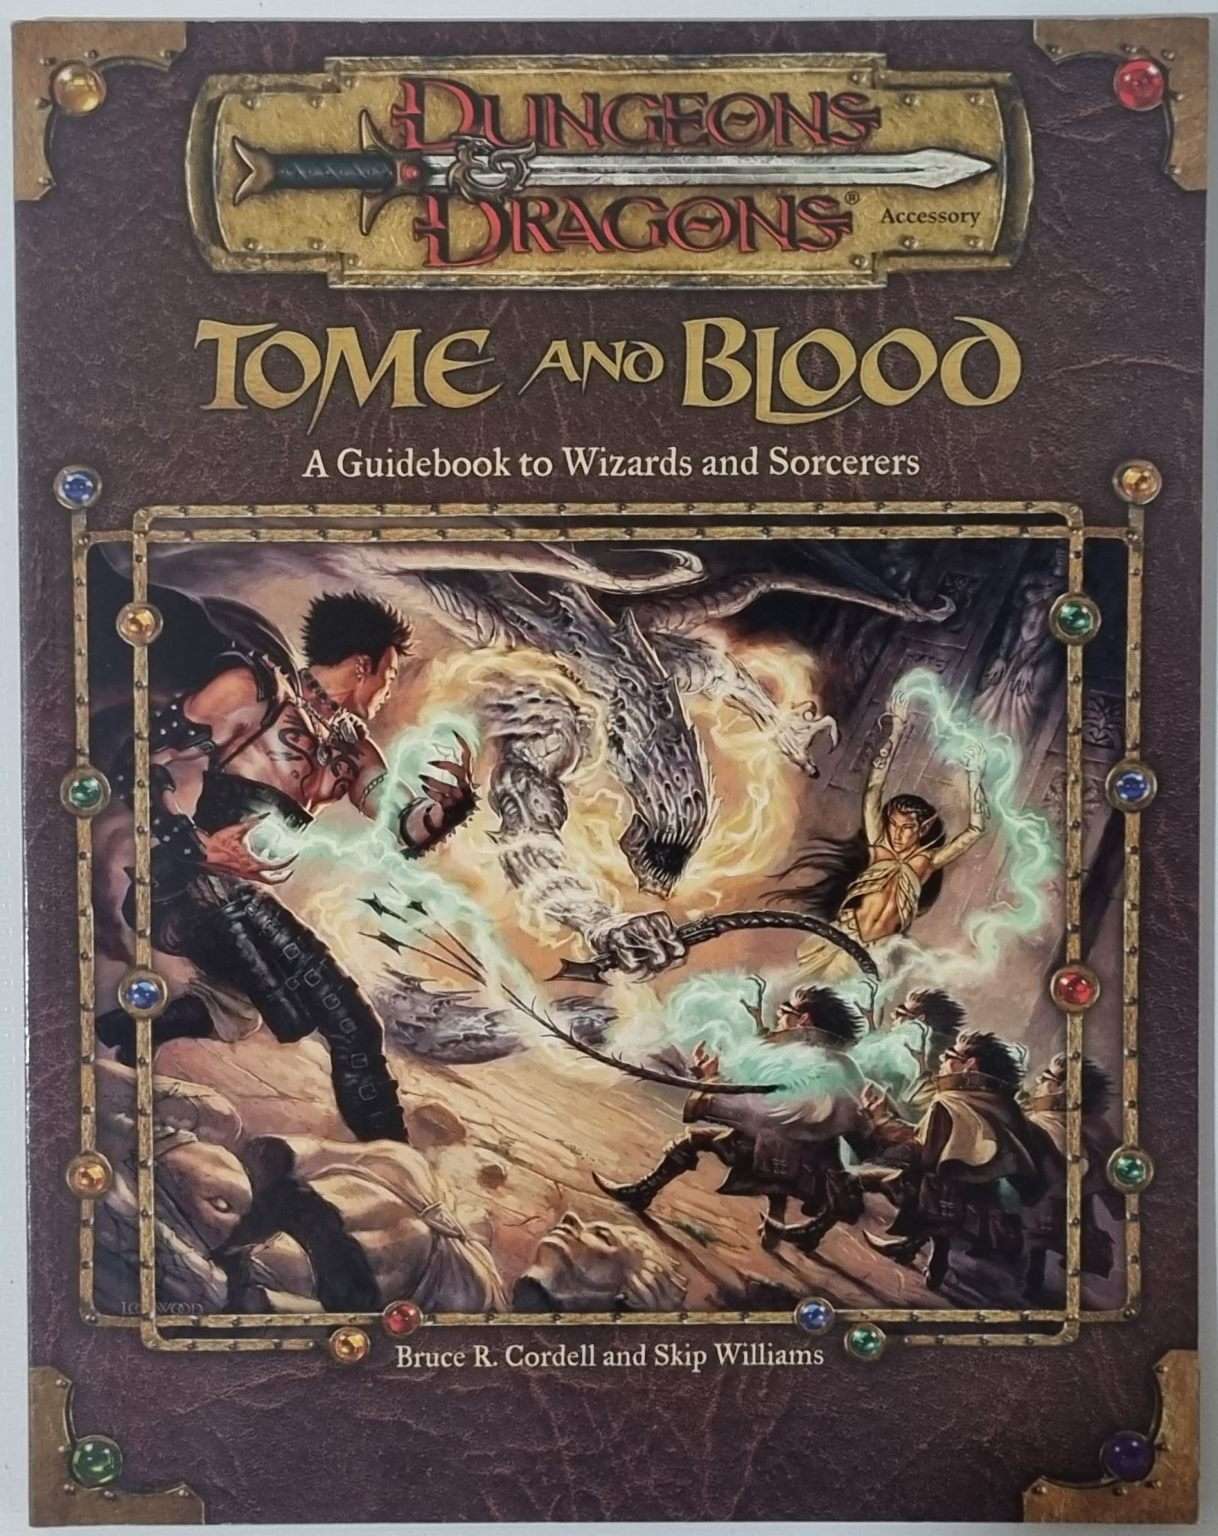 D&D - Tome and Blood - Guidebook to Wizards and Sorcerers 3.0 e